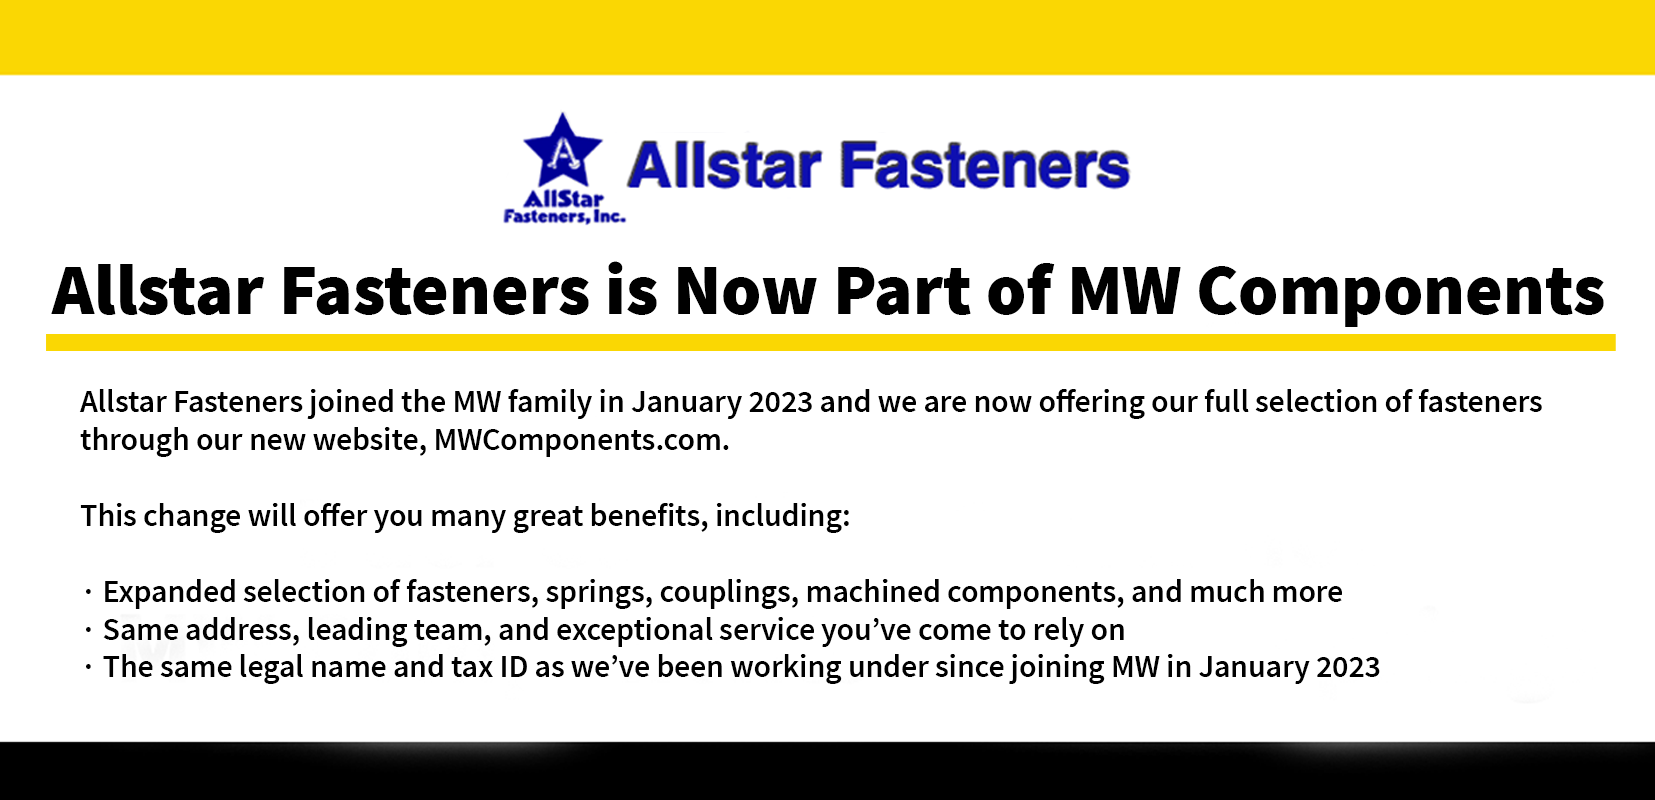 All Star Fasteners is now part of MW Components